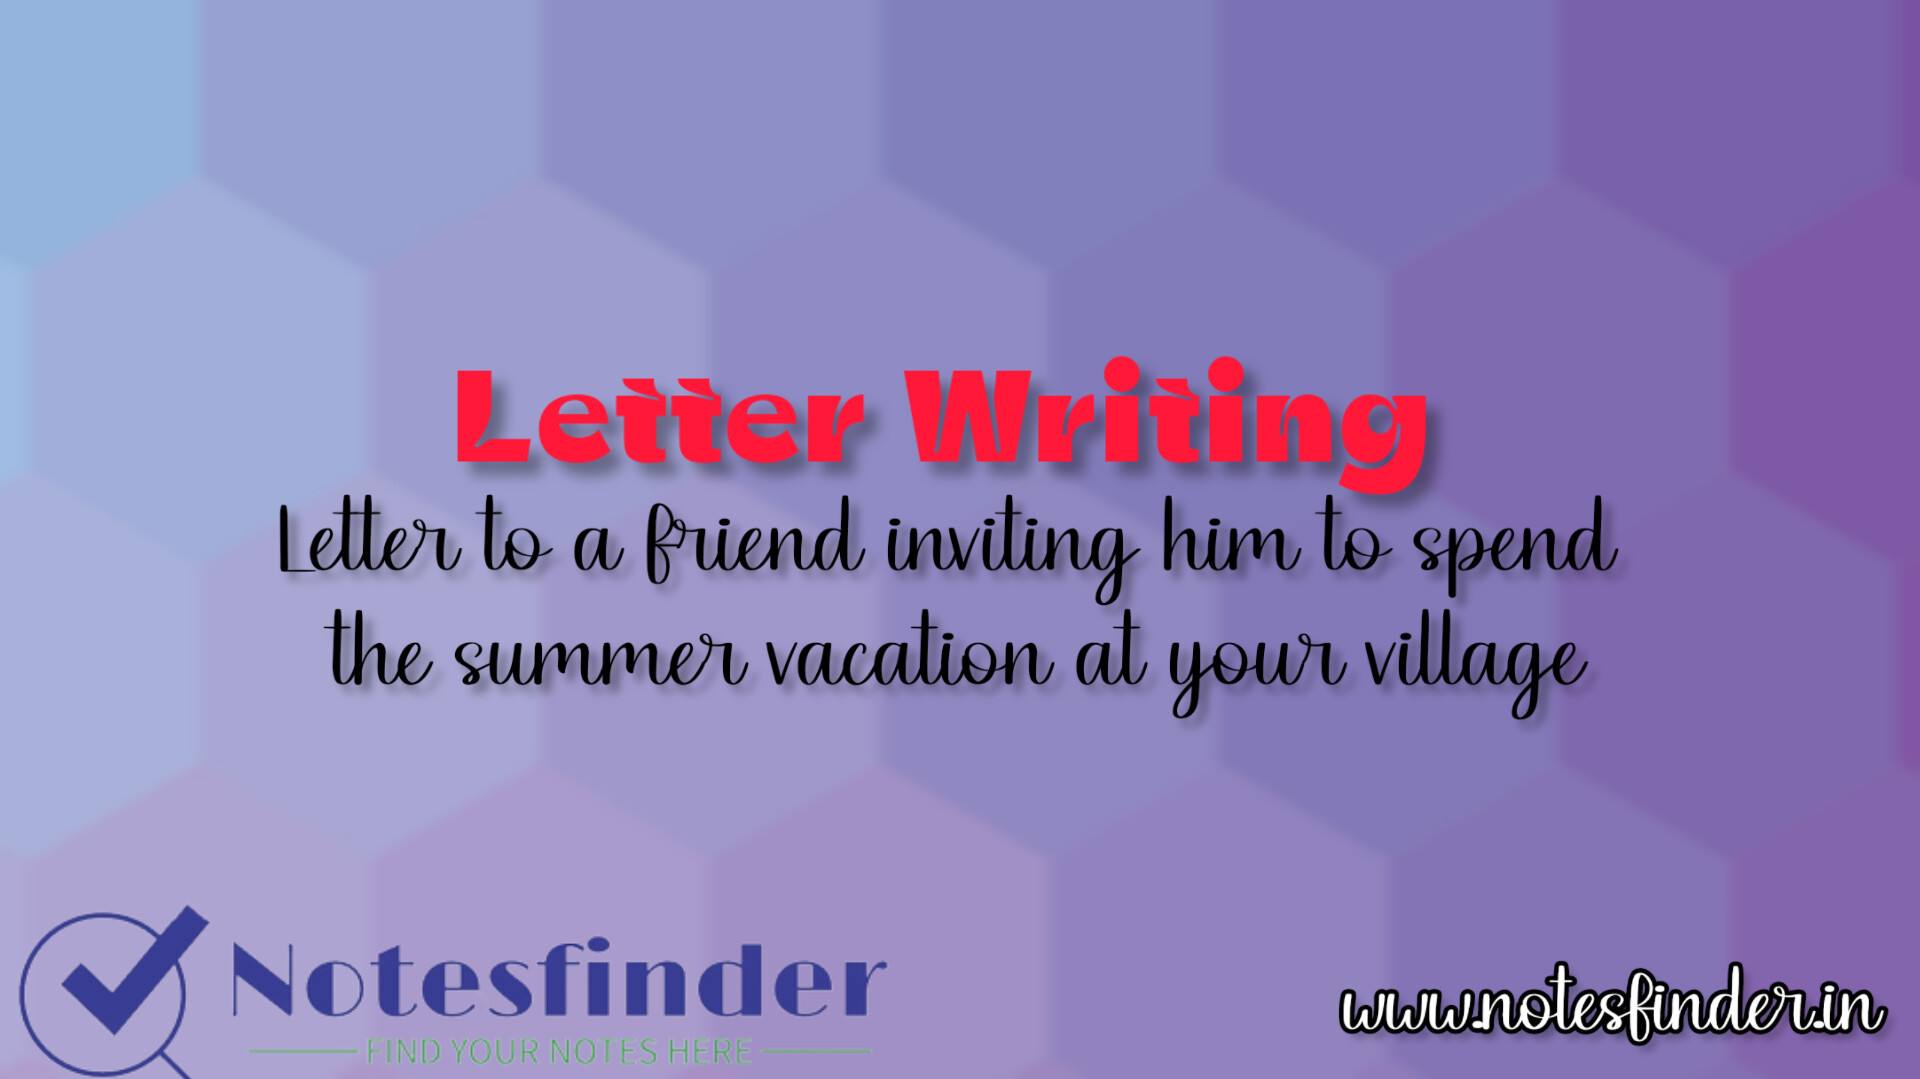 letter-to-a-friend-inviting-him-to-spend-the-summer-vacation-at-your-village-notesfinder